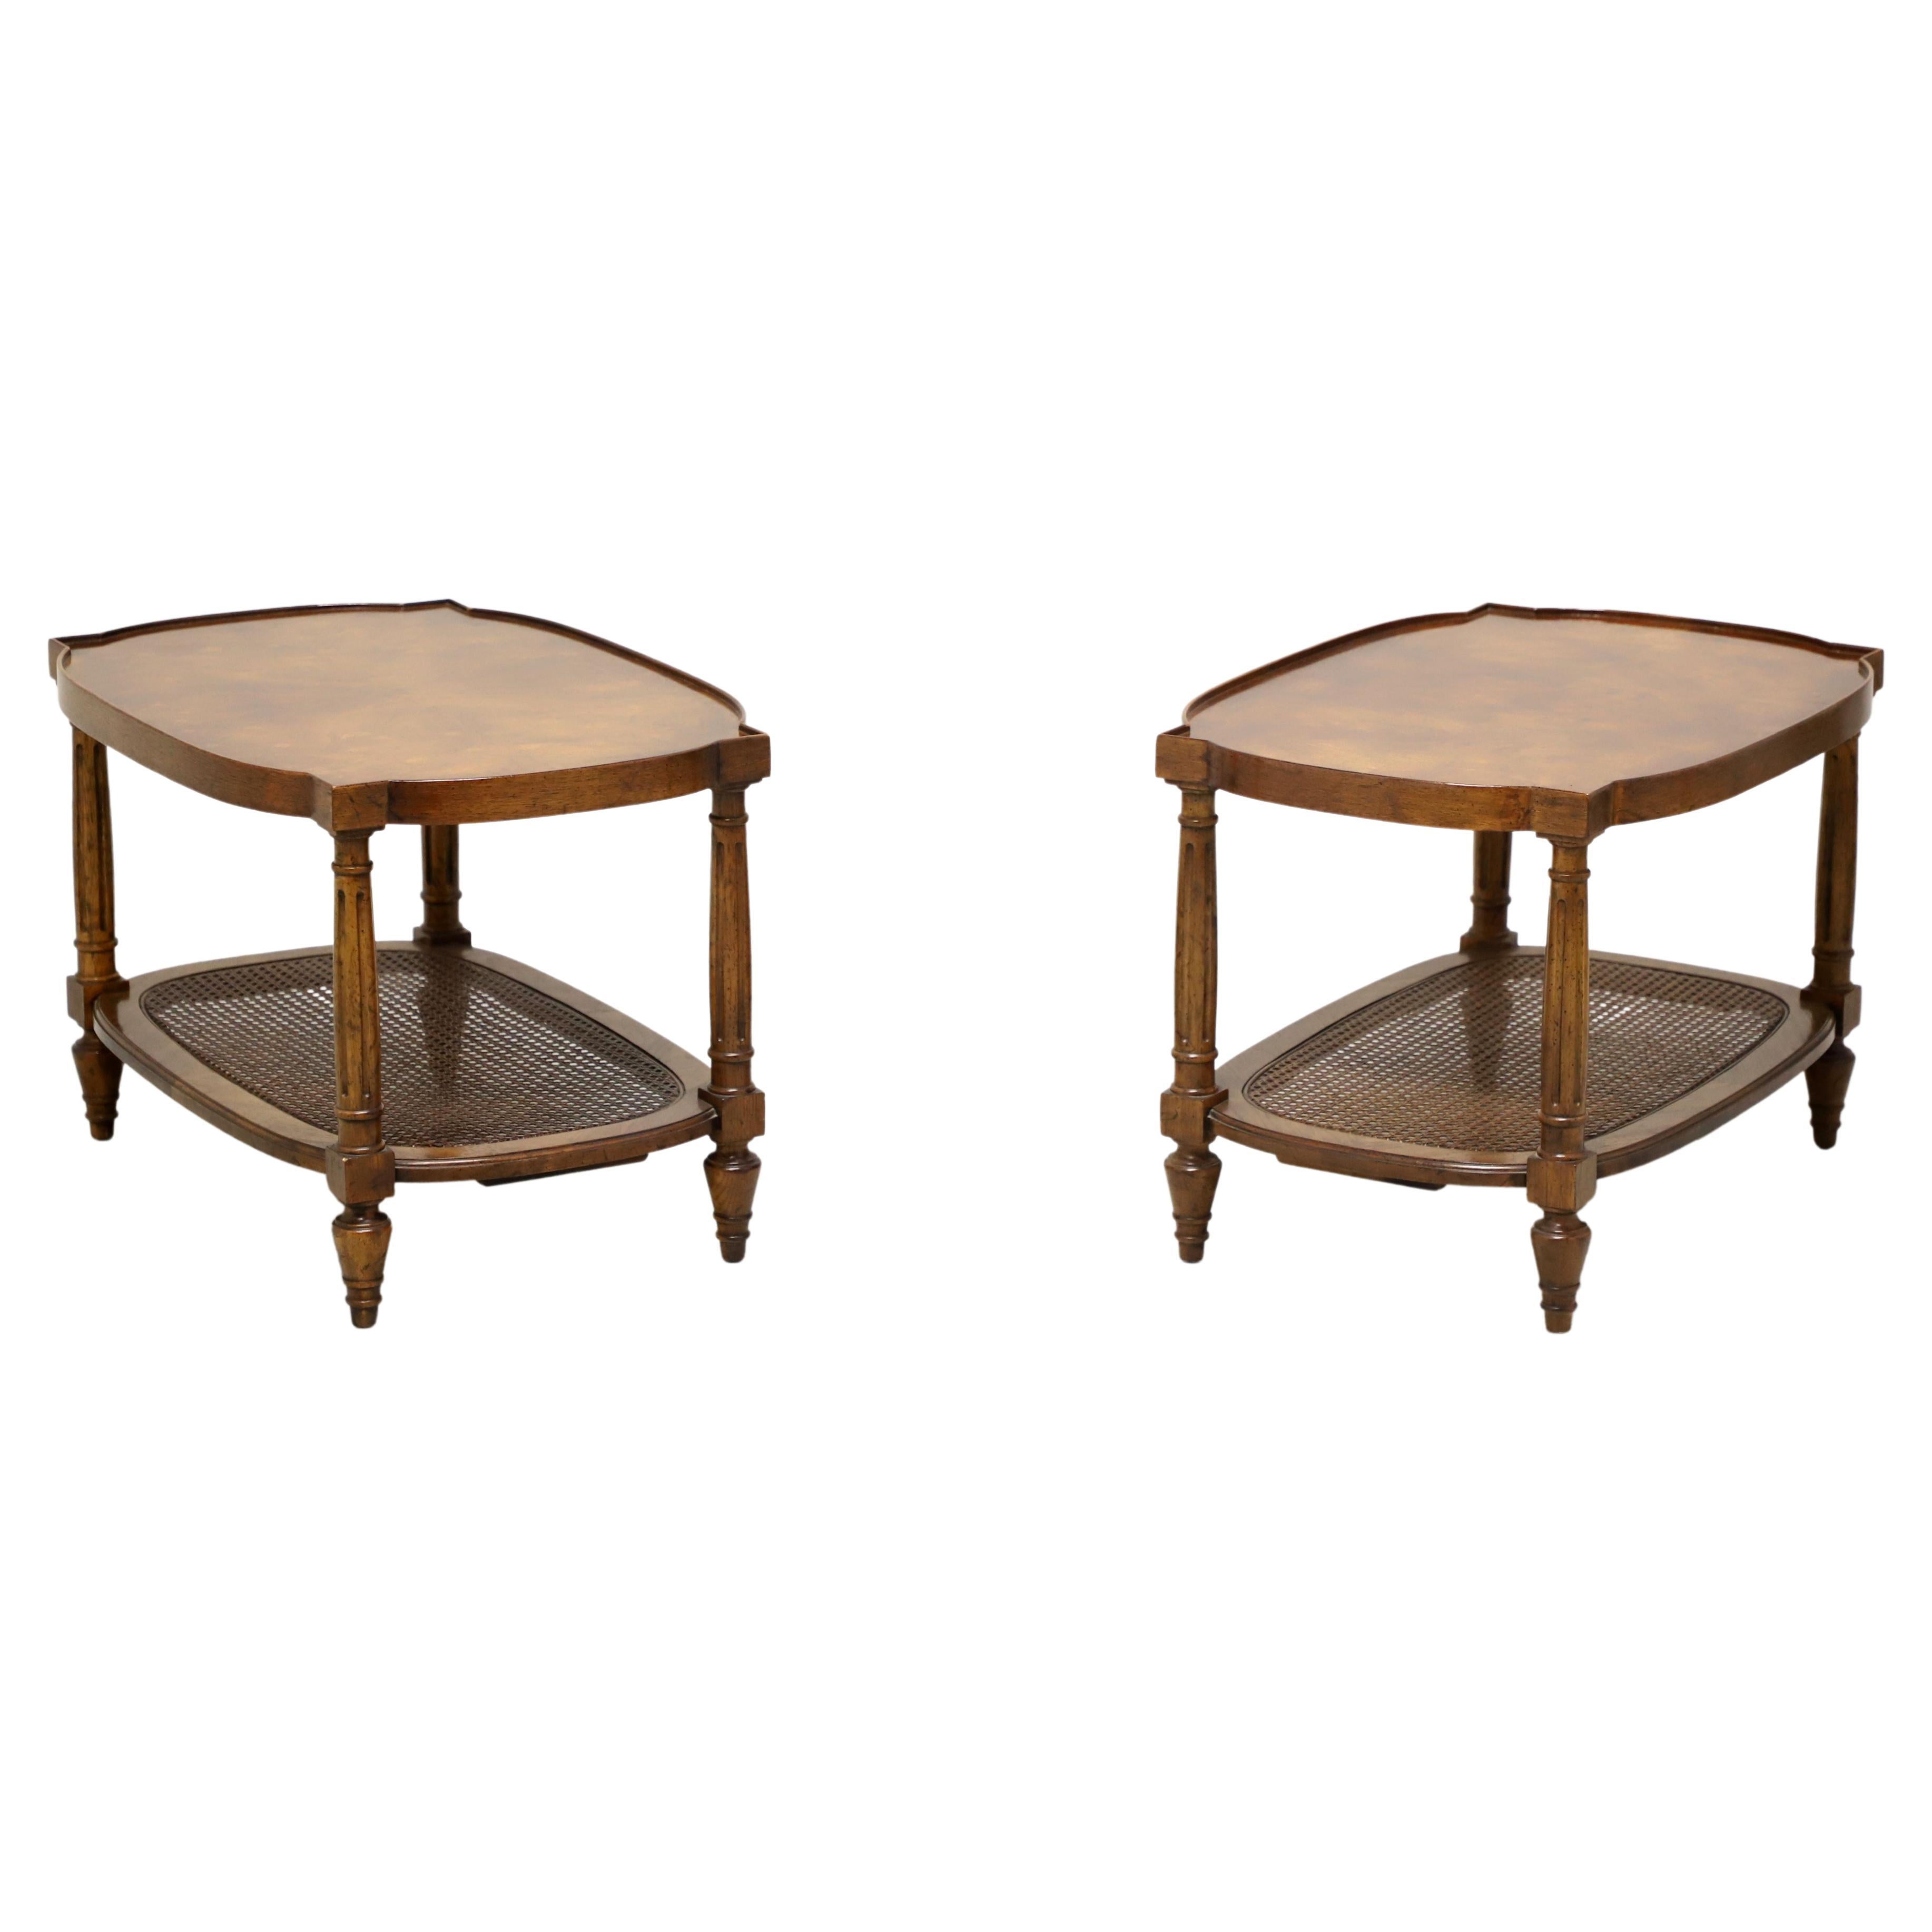 DREXEL HERITAGE Mid 20th Century Burl Walnut Caned Coffee Cocktail Tables - Pair For Sale